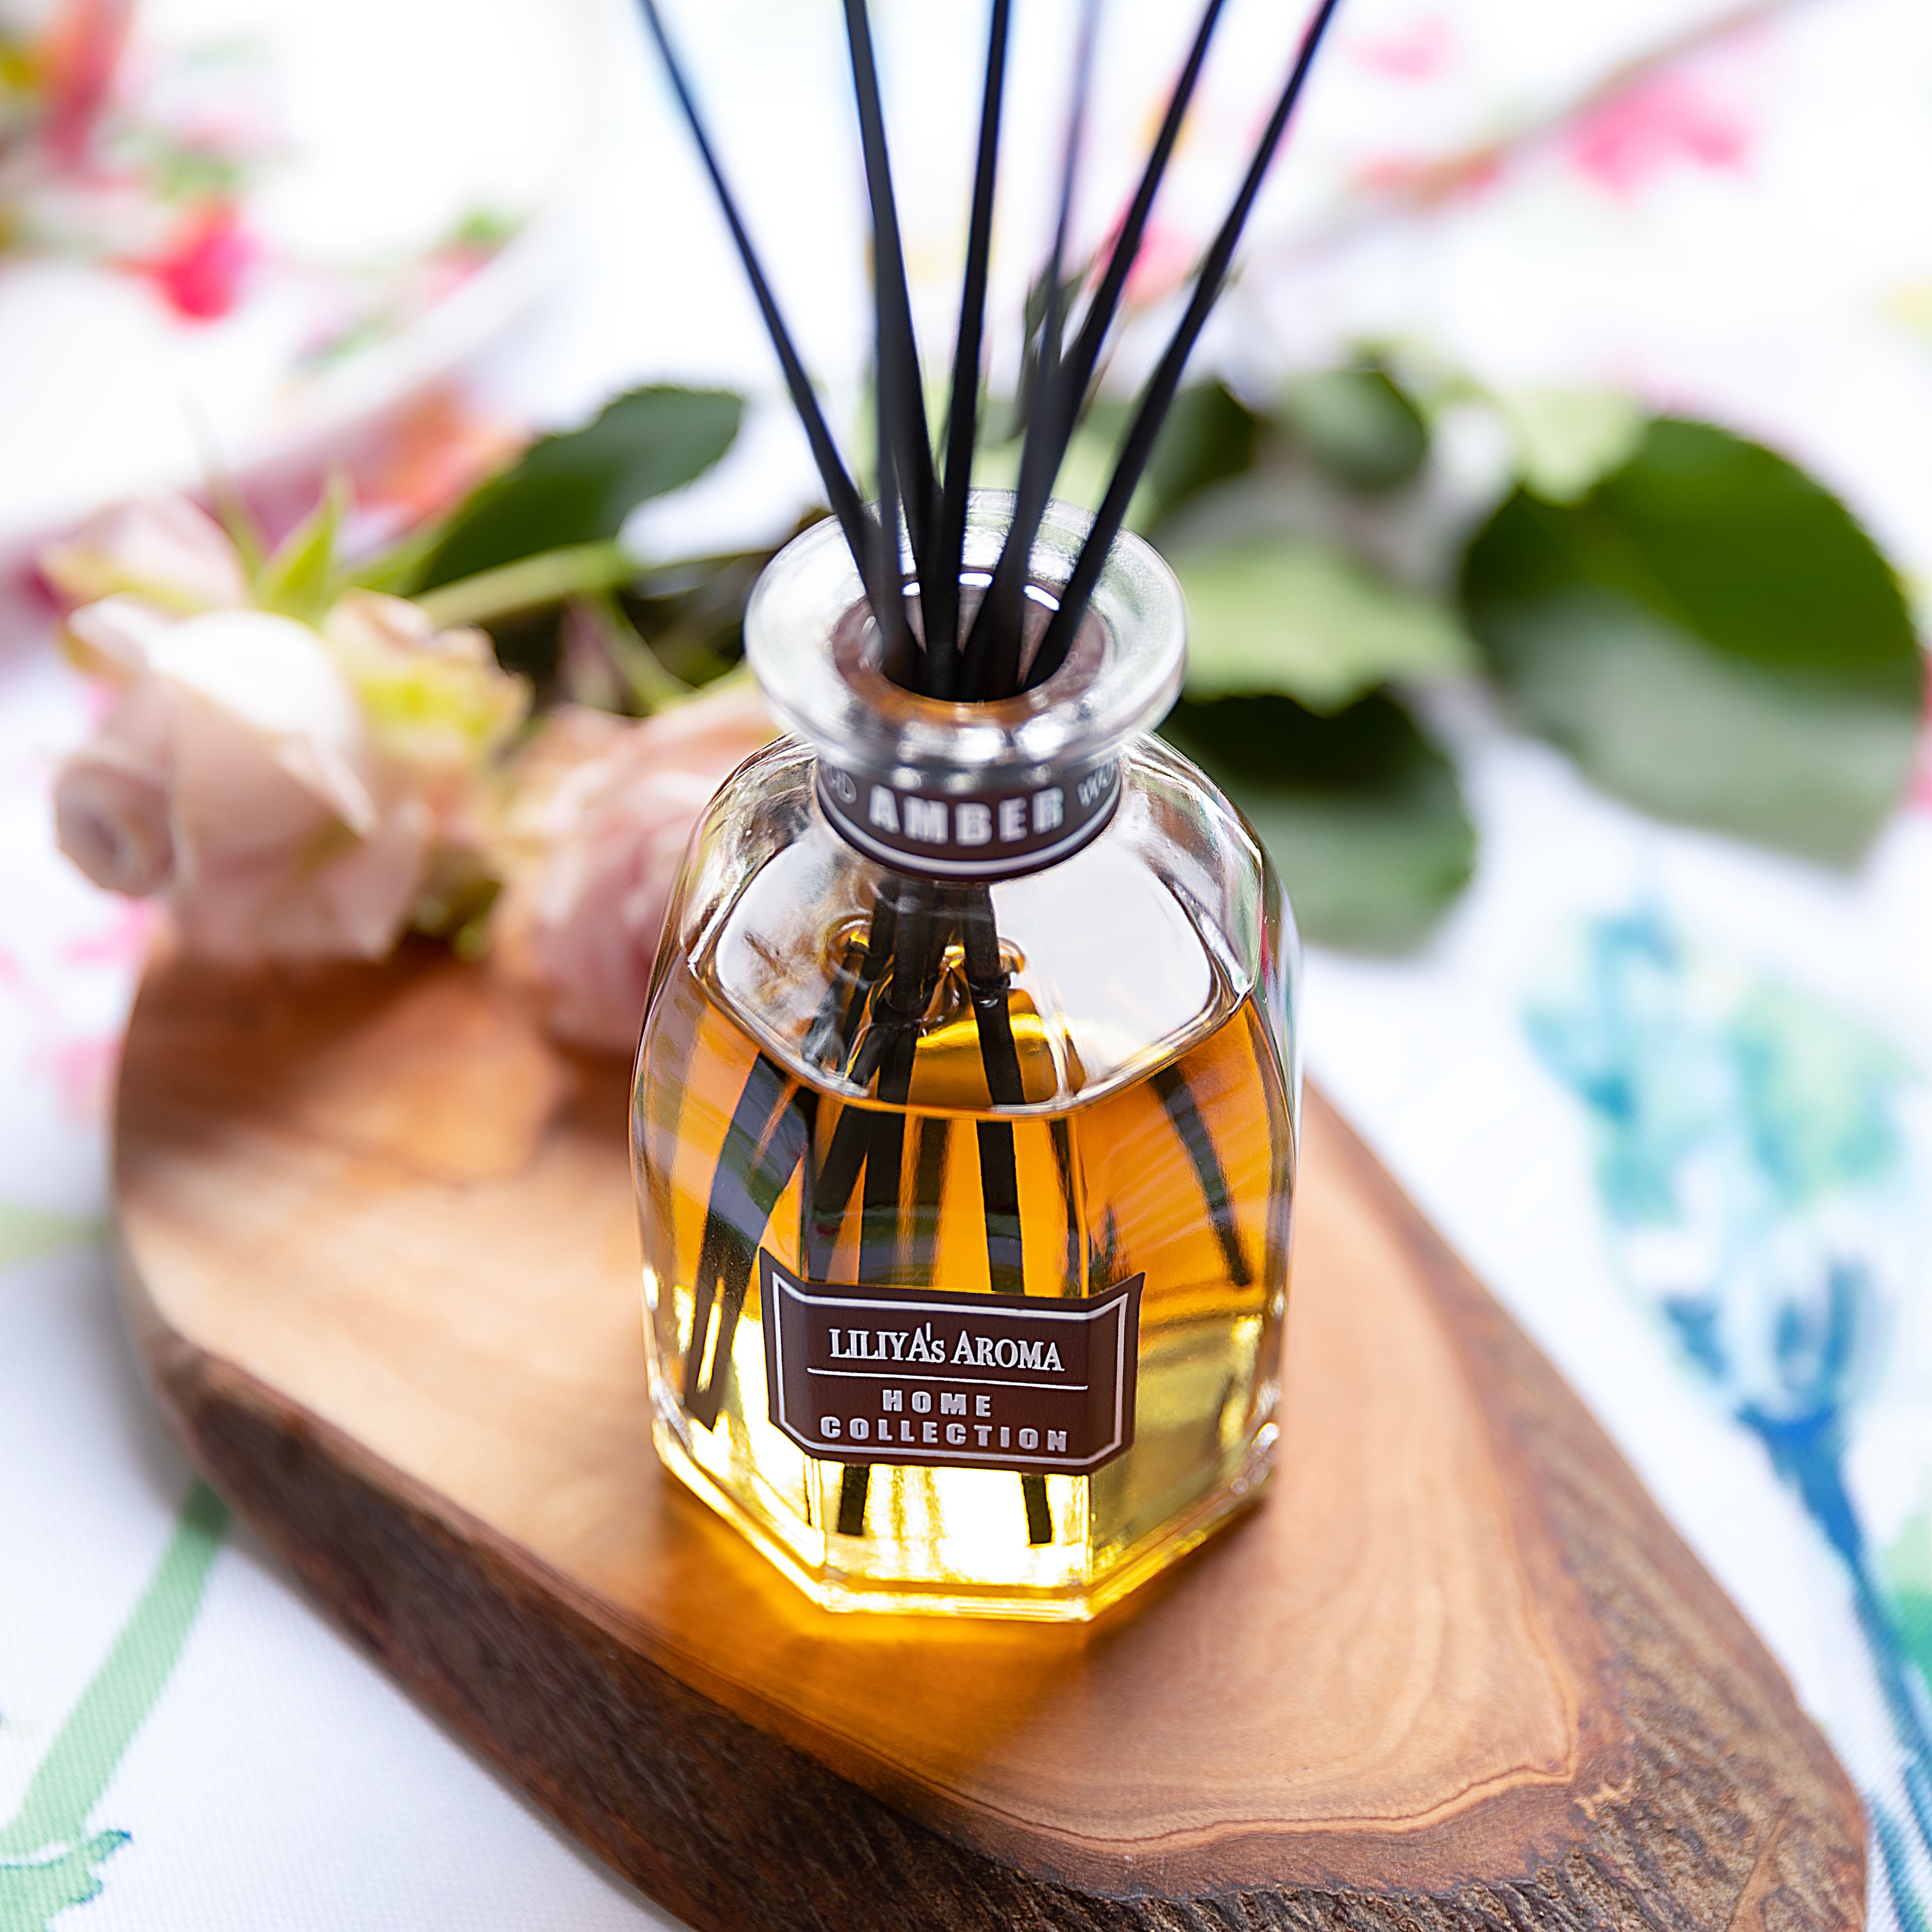 Liliya’s Aroma Reed Diffuser Amber Wood, Home Collection, Diffuser Scent of Sandalwood and Sweet Vanilla, Diffuser Set 5 oz |150 ml